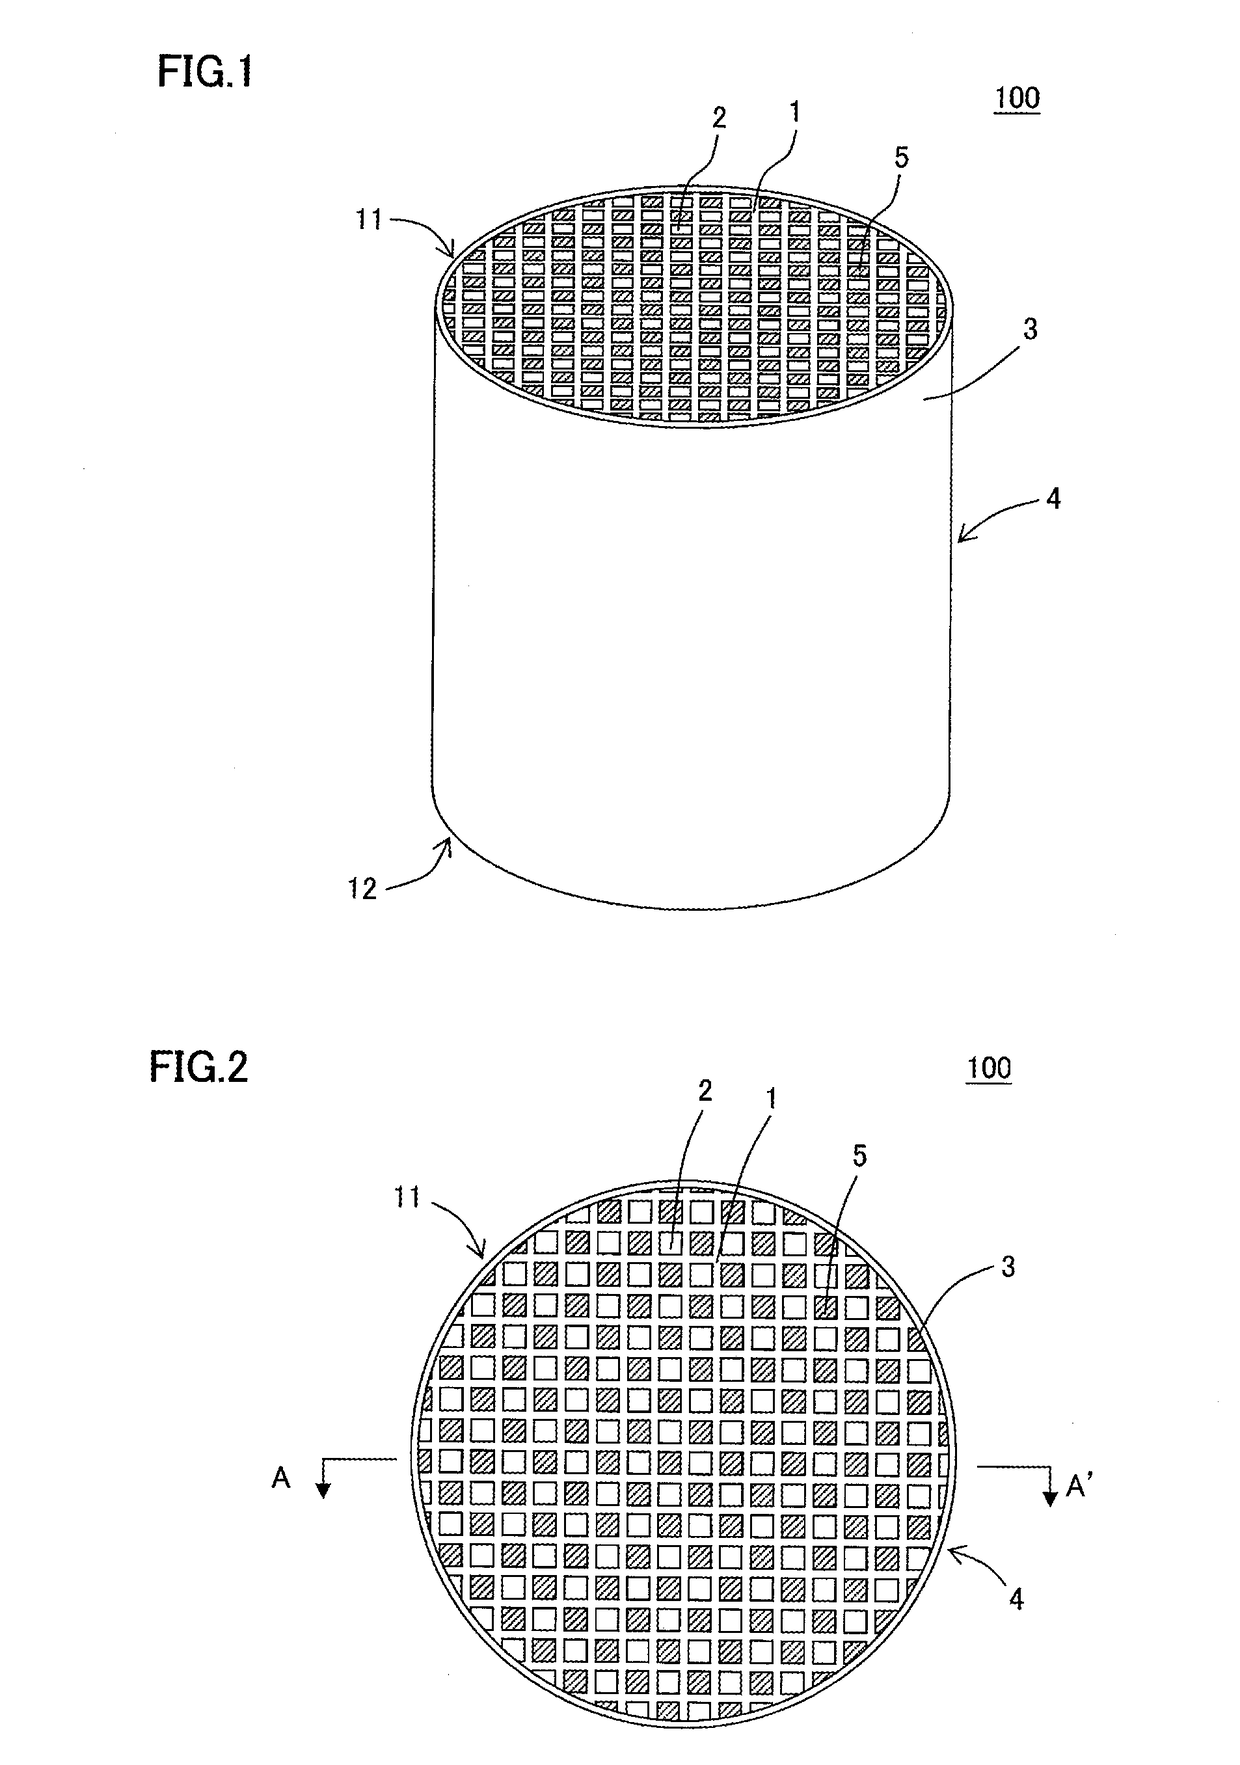 Plugged honeycomb structure